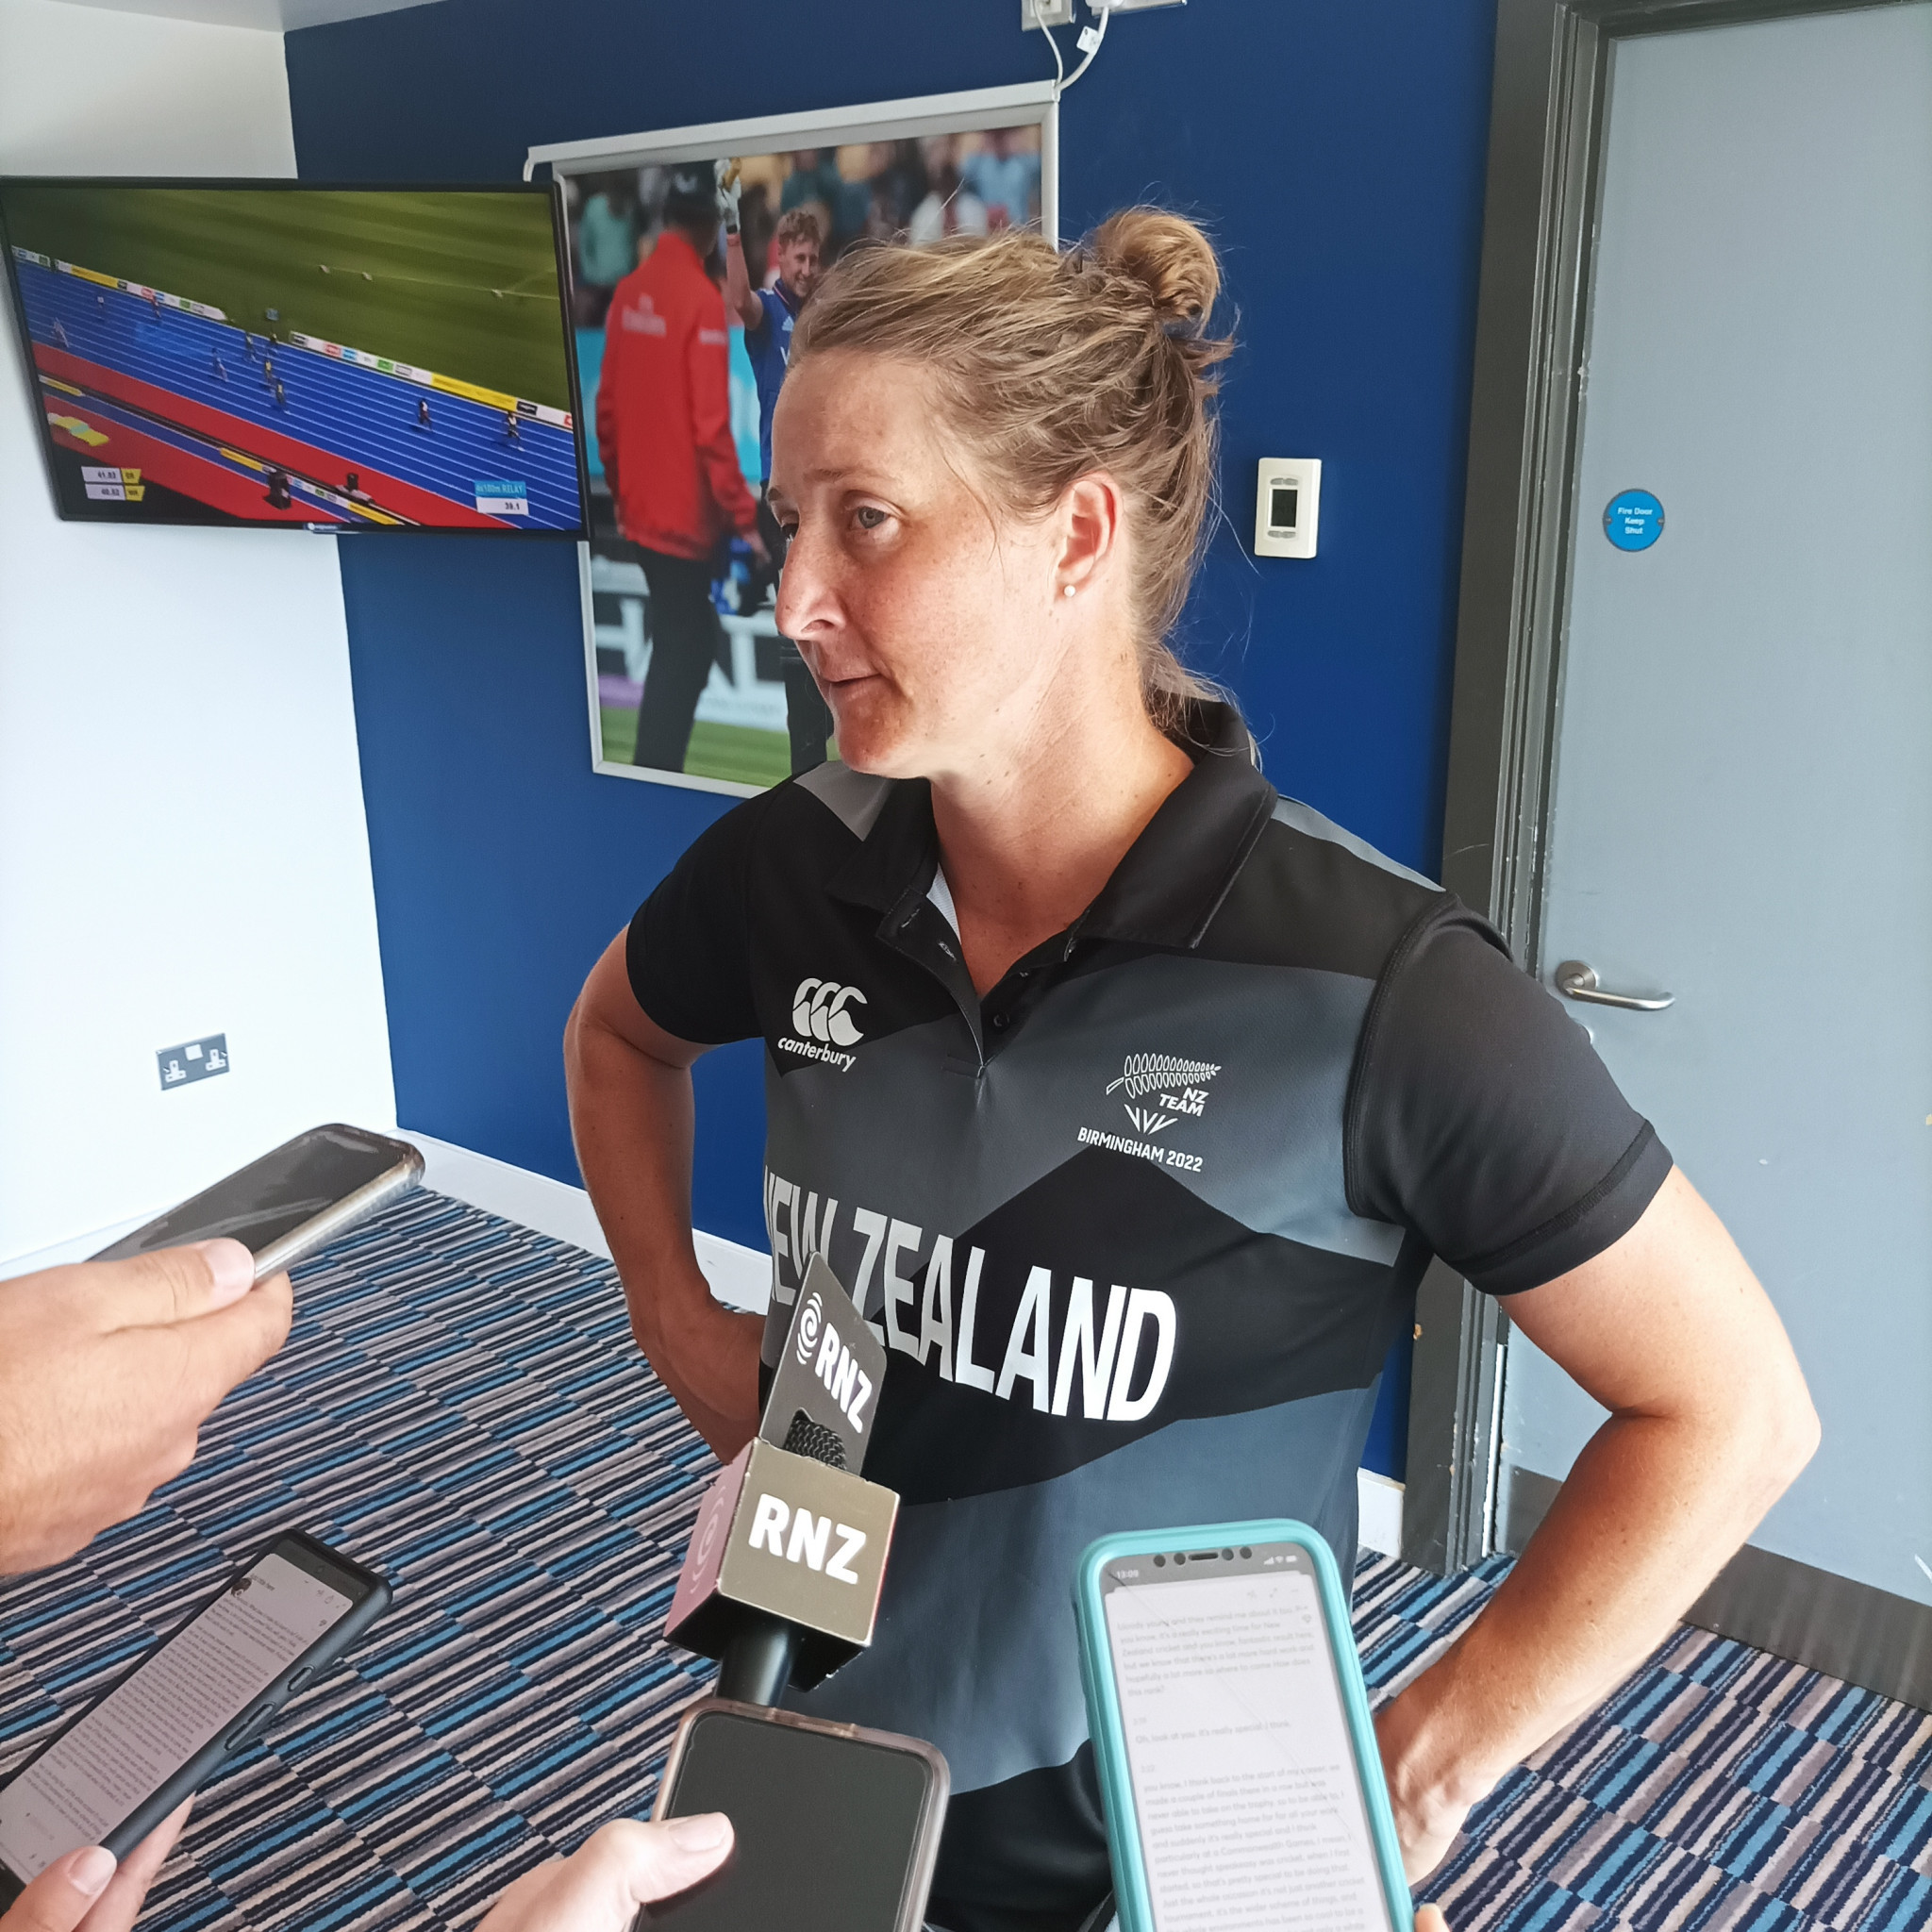 The microphones confronting New Zealand captain Sophie Devine demonstrated the increase in media attention since the first Women's World Cup in 1973  ©ITG